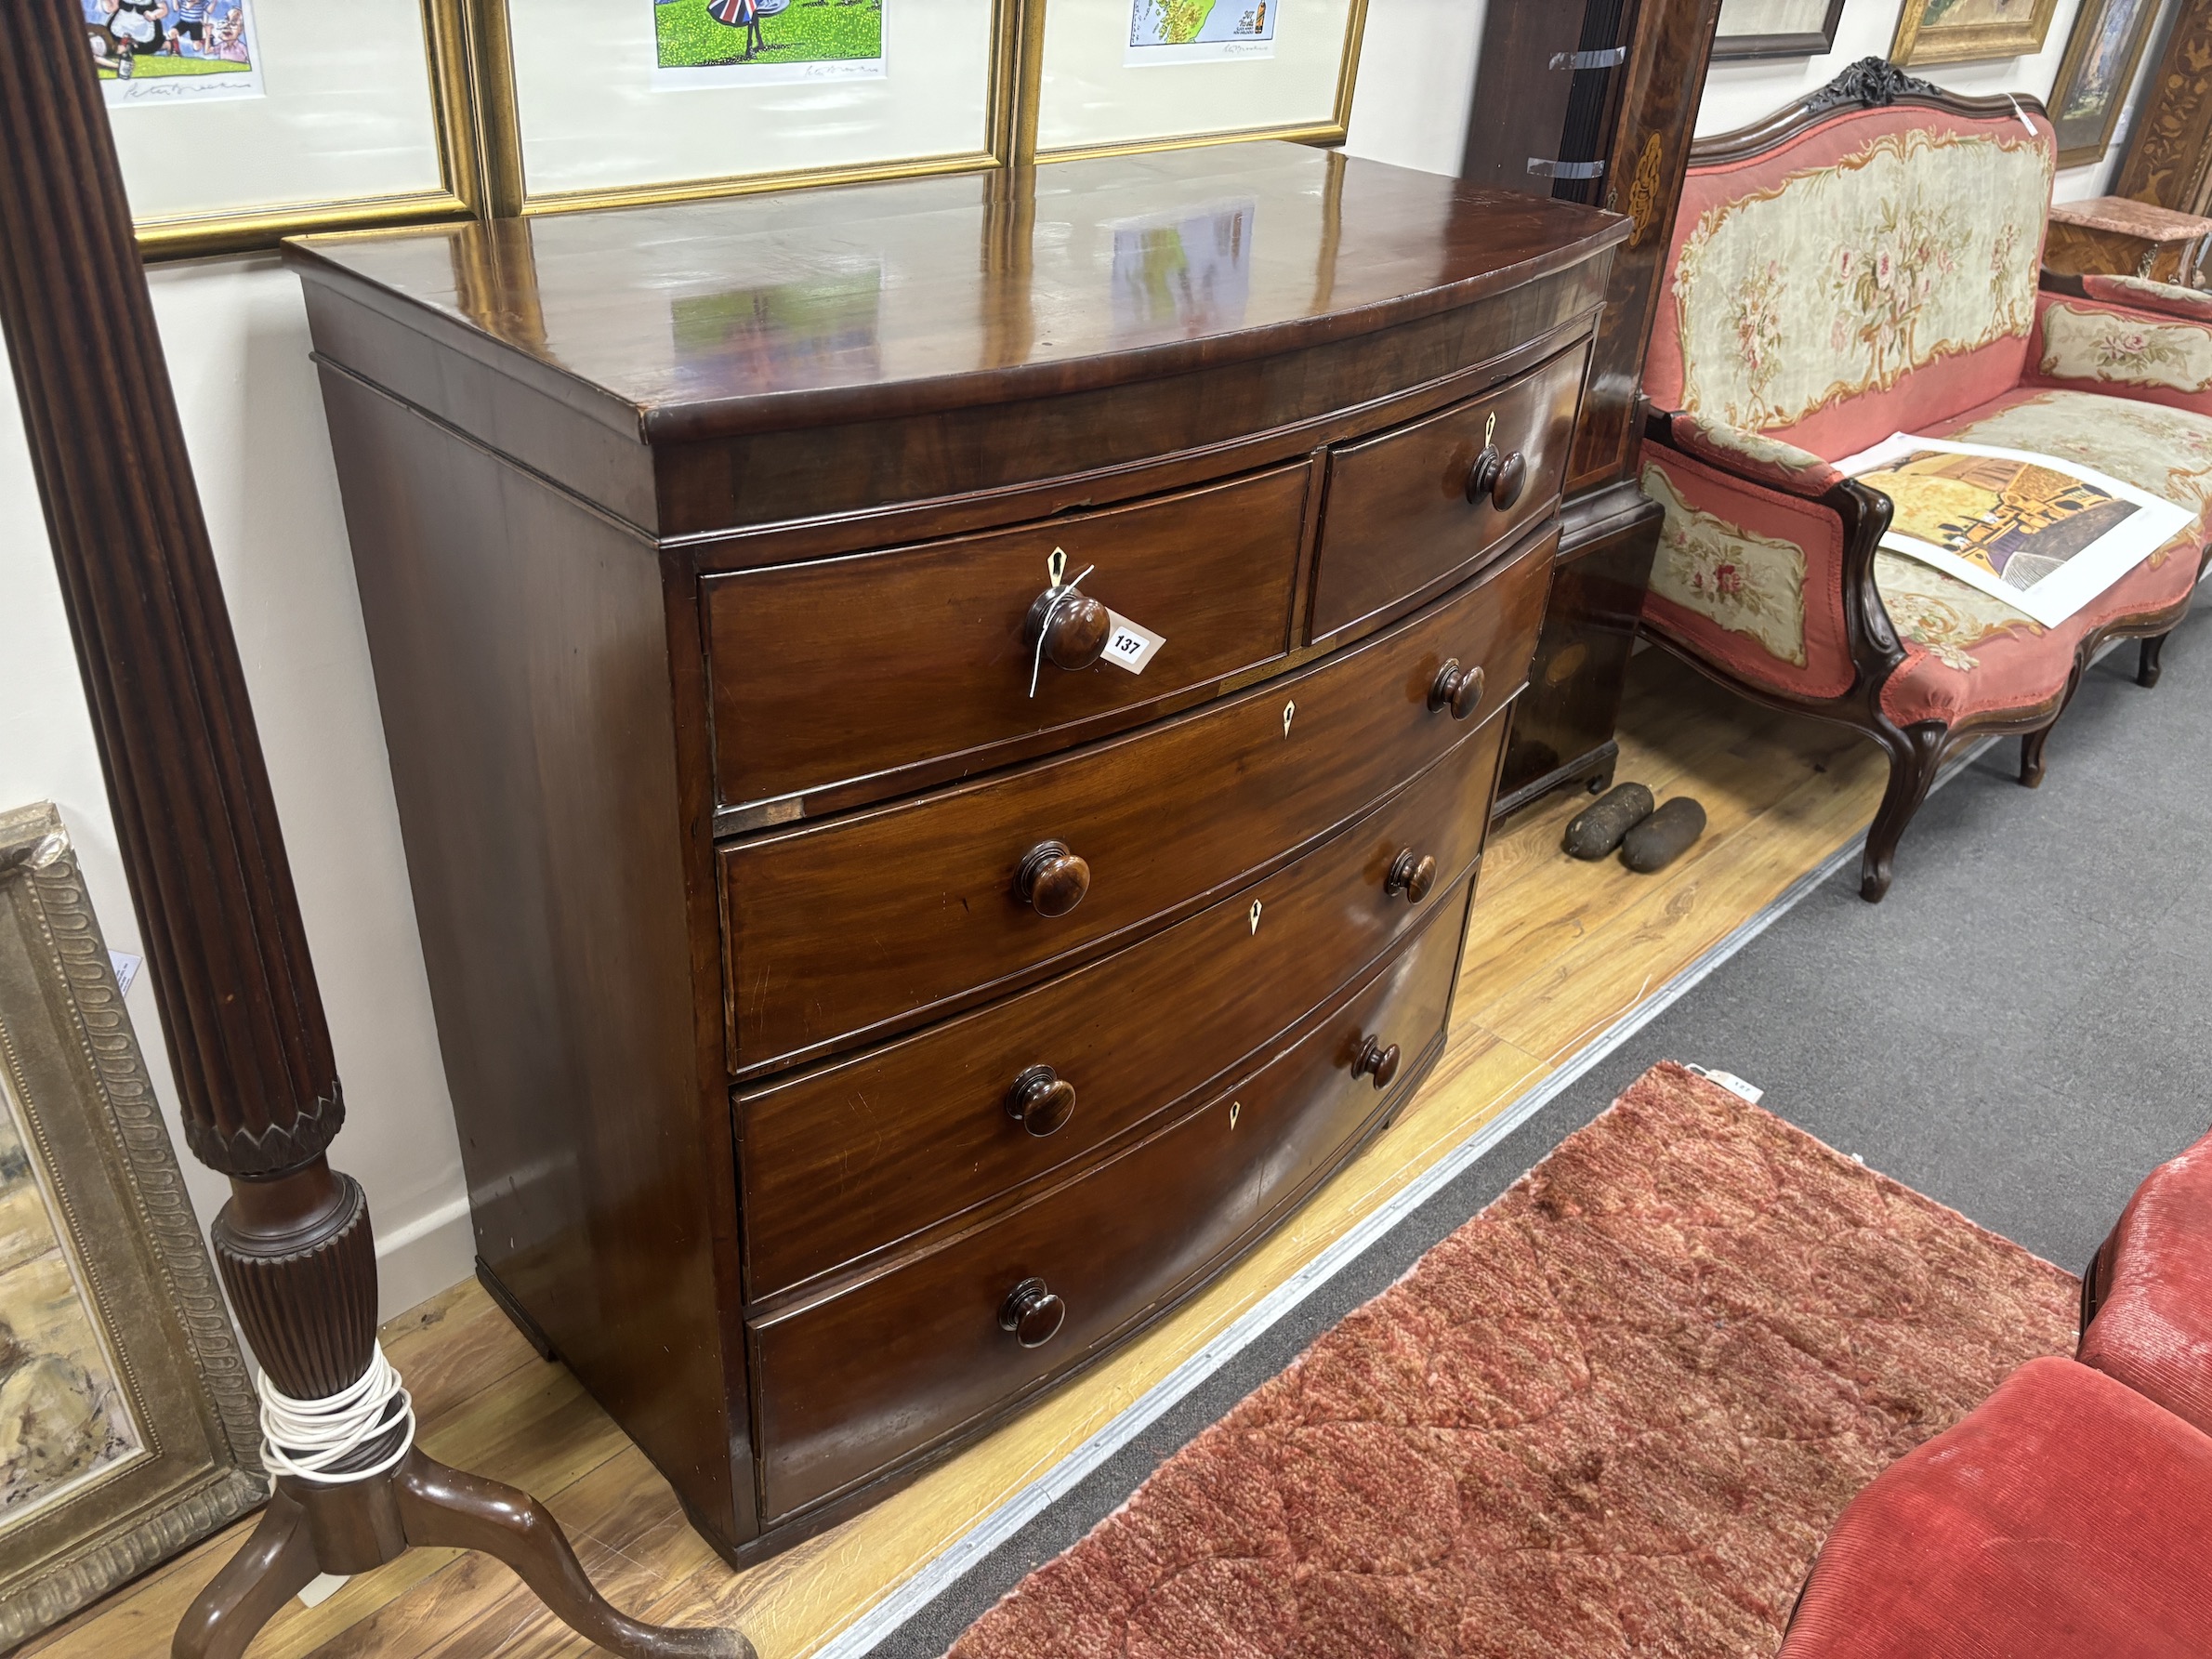 An early 19th century mahogany bowfront chest of drawers, with bone escutcheons, width 114cm, depth 55cm, height 107cm